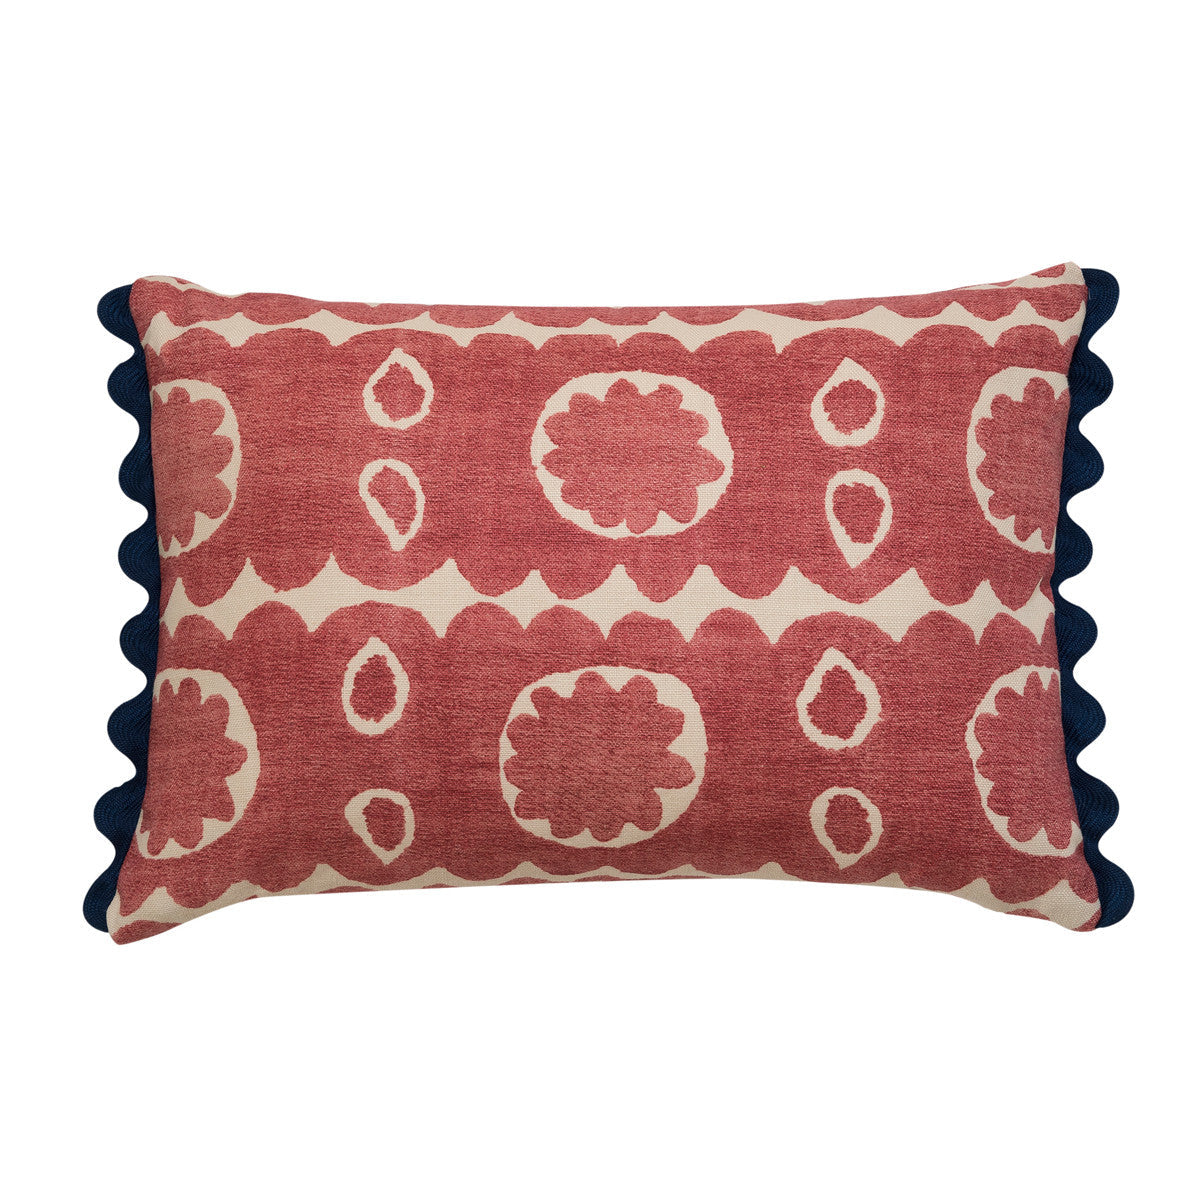 Red floral oblong cushion with navy blue scalloped trim. 